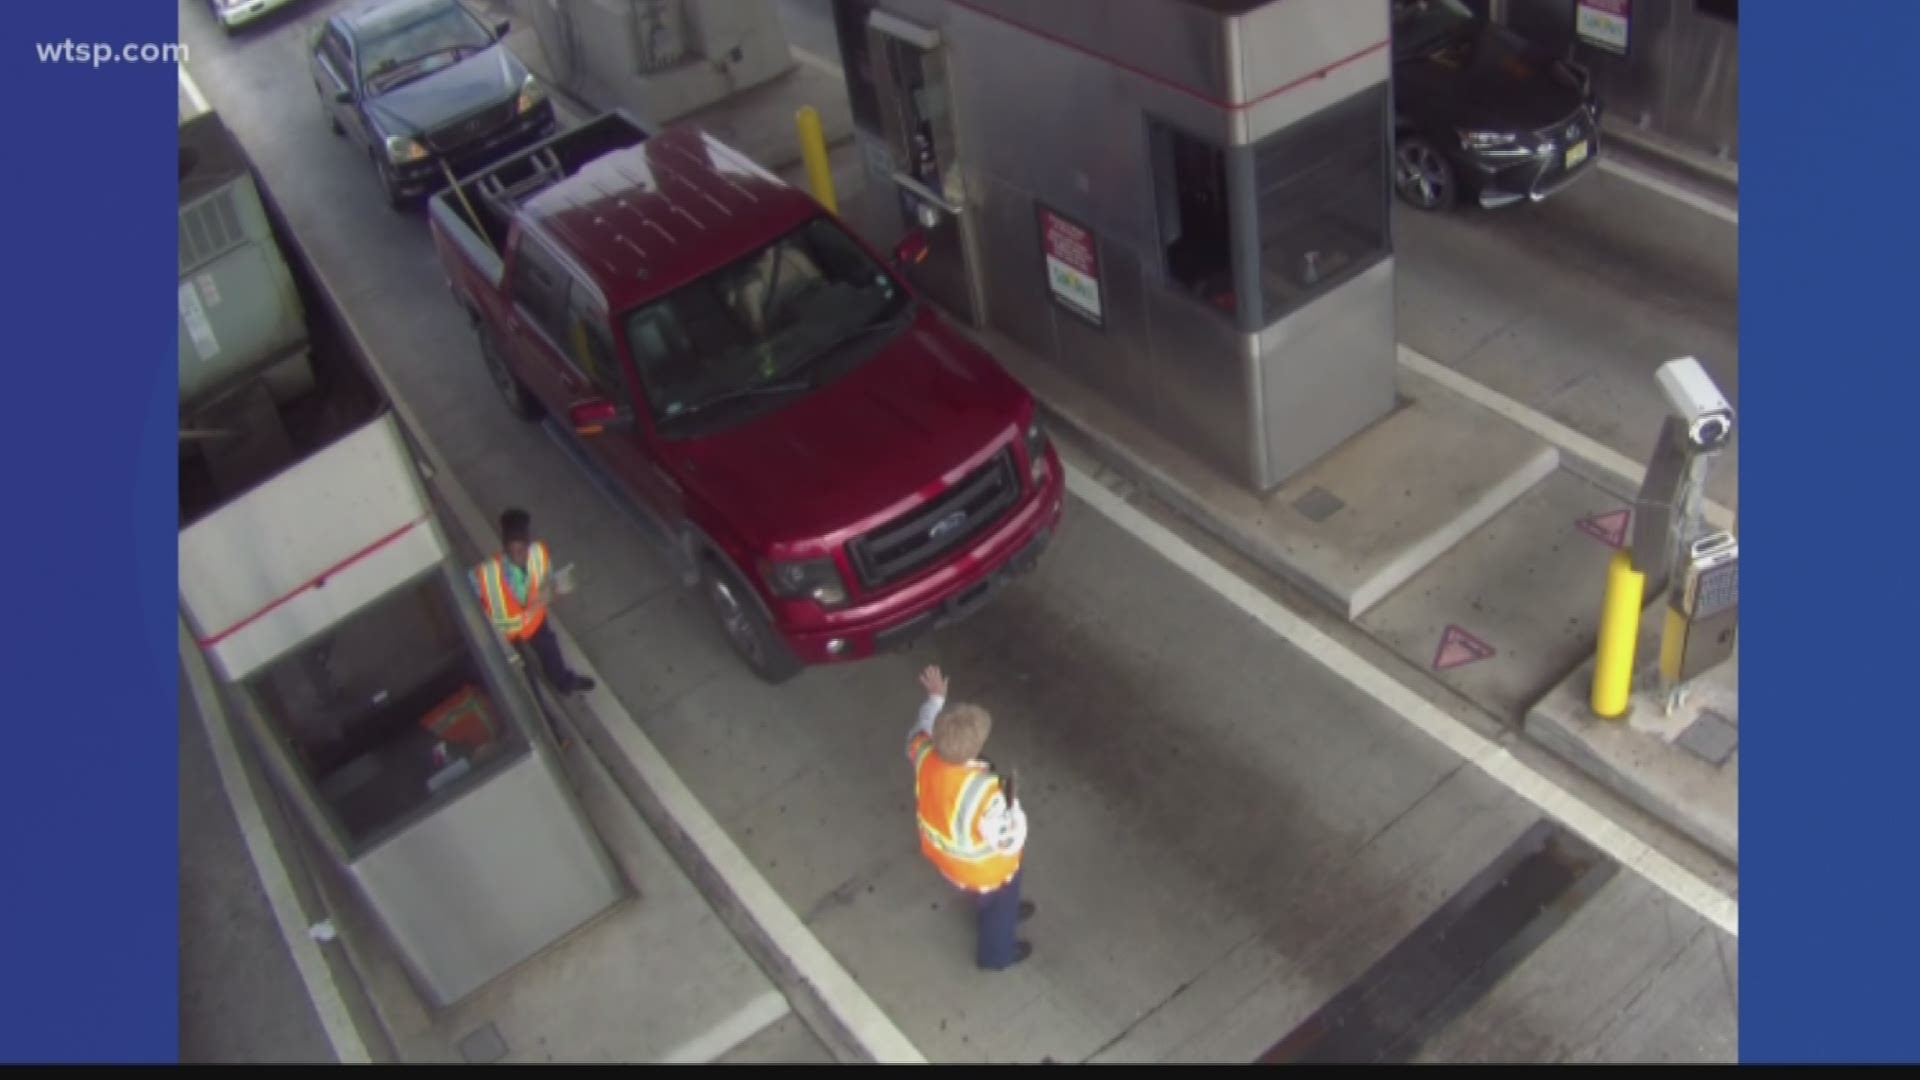 A truck driver is facing charges after hitting an 80-year-old woman and knocking her to the ground at the Sunshine Skyway Bridge toll booth plaza.